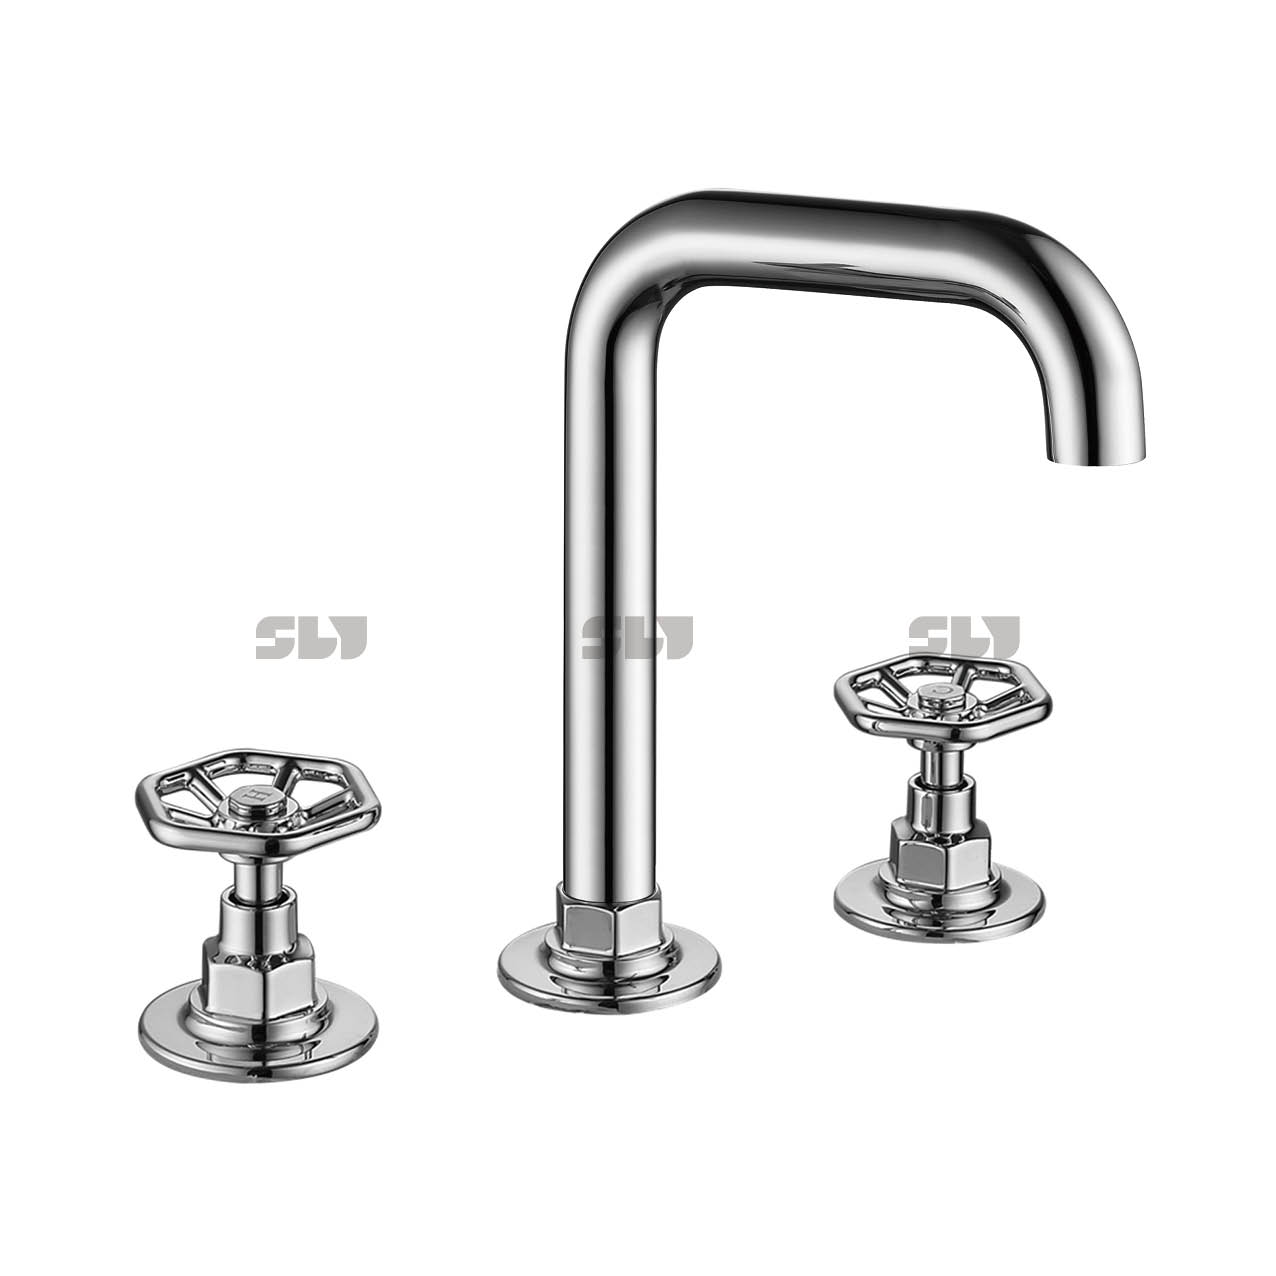 SLY Widespread Bathroom Sink Faucet 3 Hole Deck Mounted Dual Handle Hot Cold Water Brush Nickel Mixer Tap